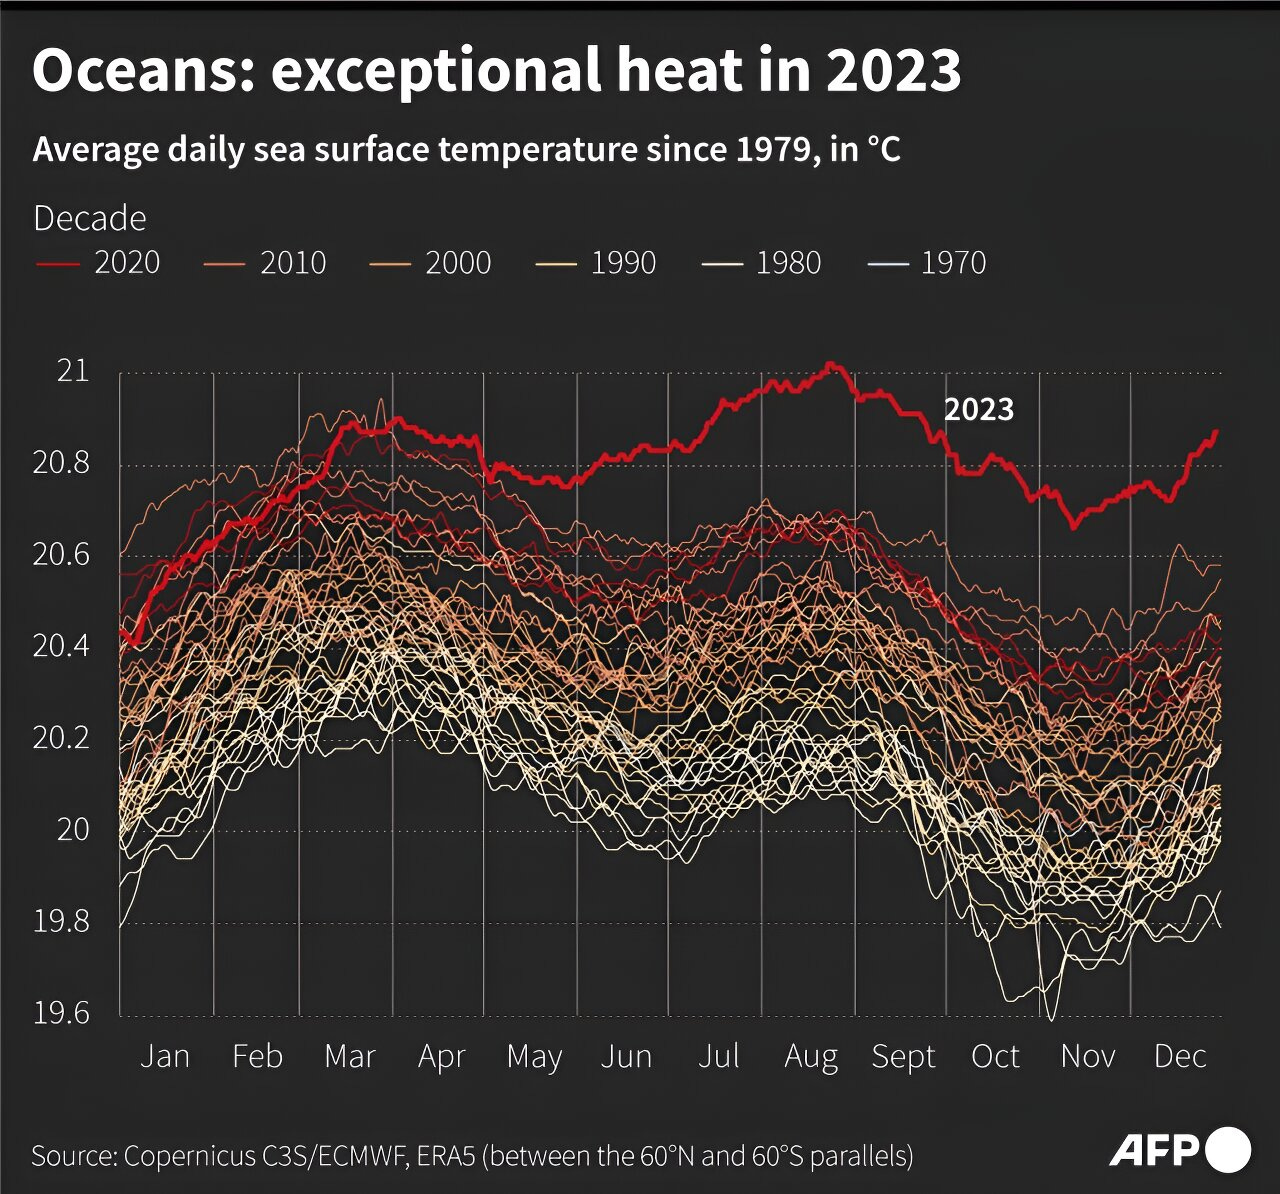 Global average daily sea surface temperature for each year since 1979